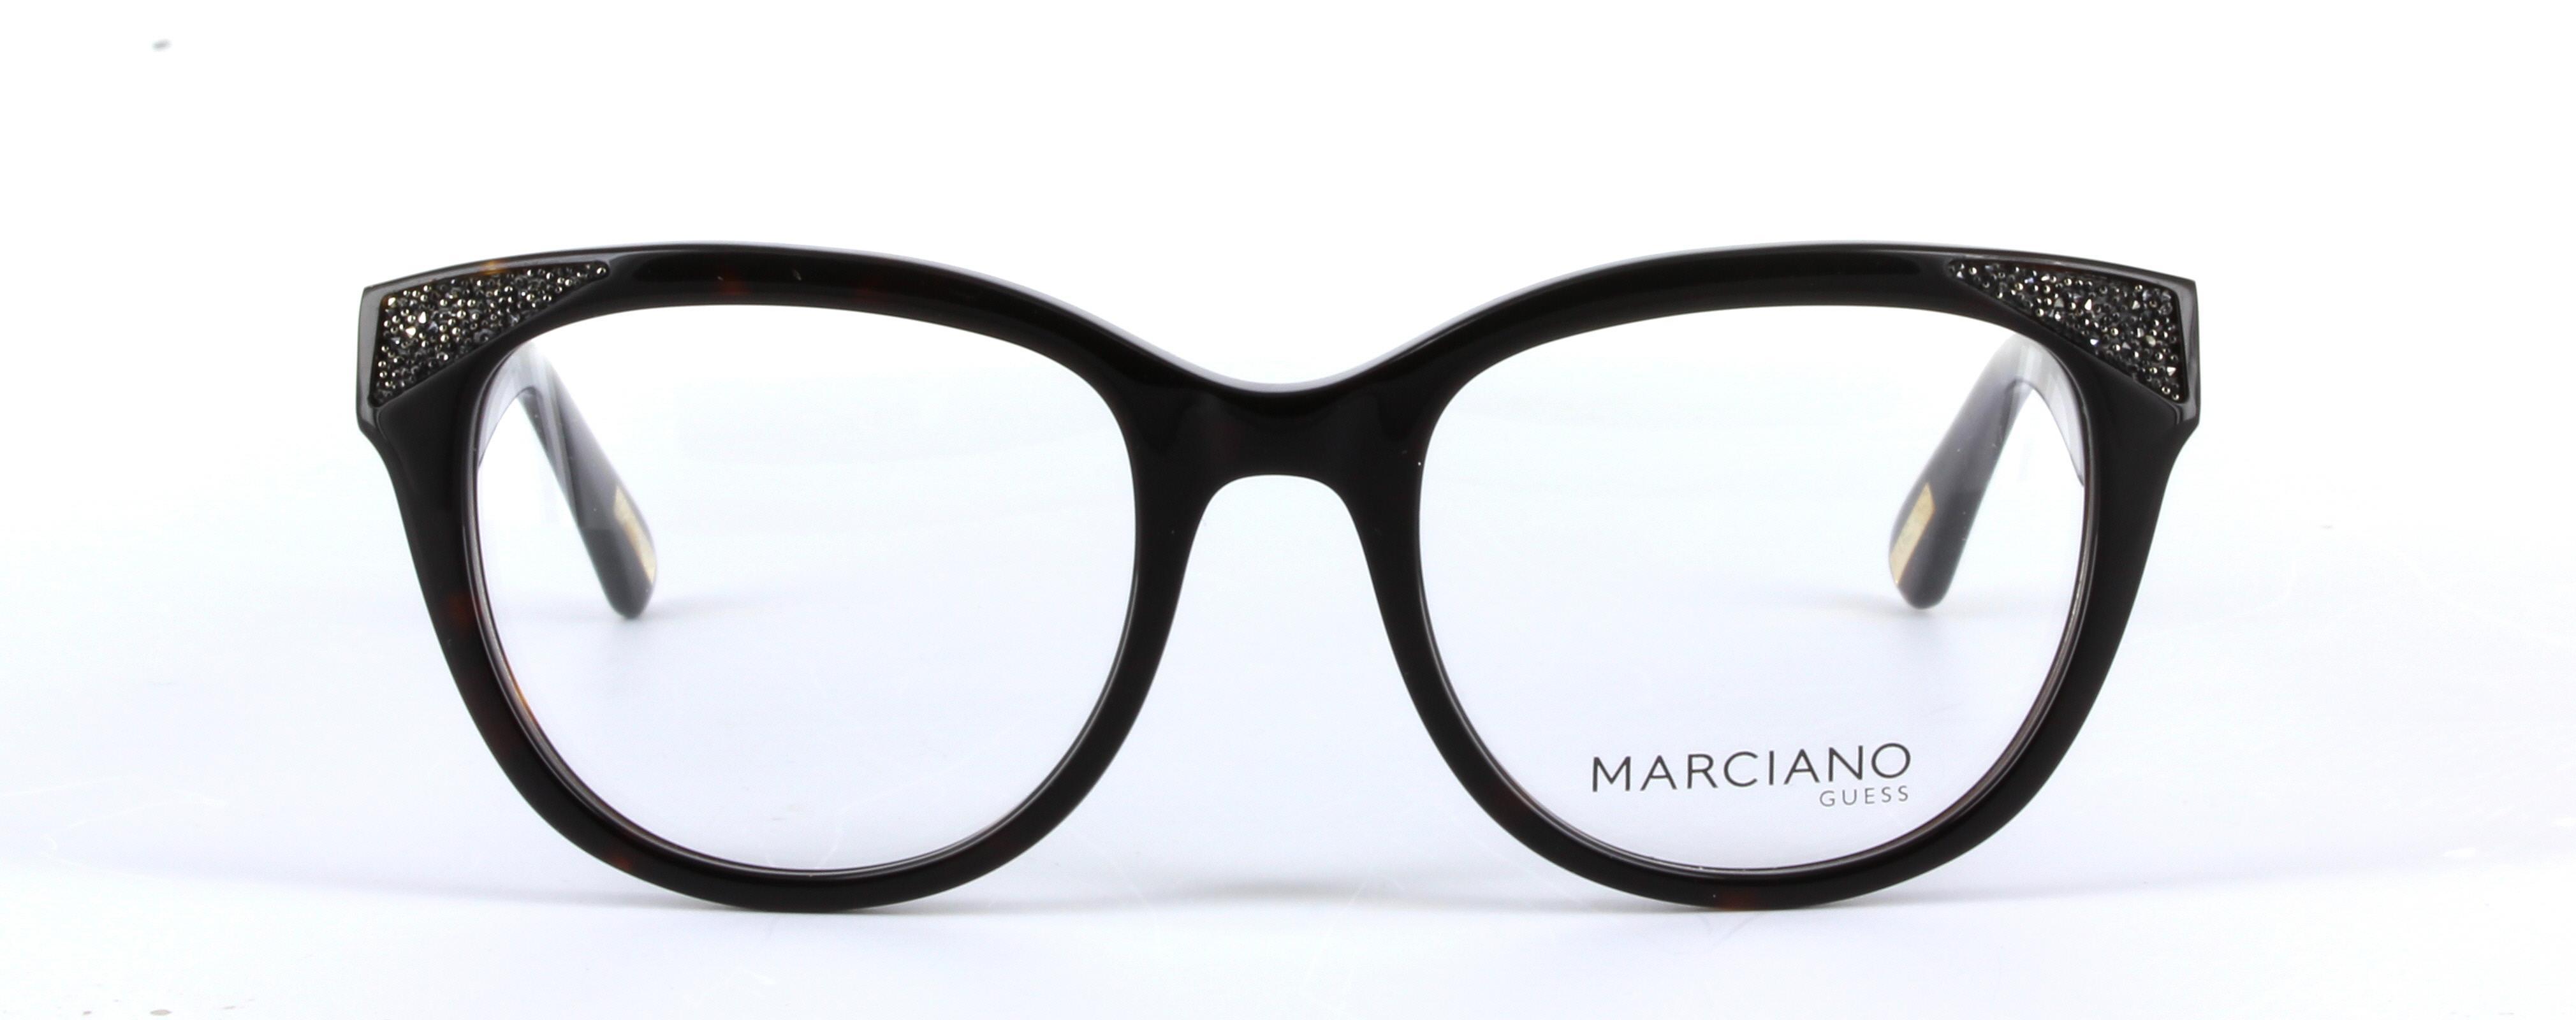 GUESS MARCIANO (GM0319-052) Tortoise Full Rim Oval Acetate Glasses - Image View 5